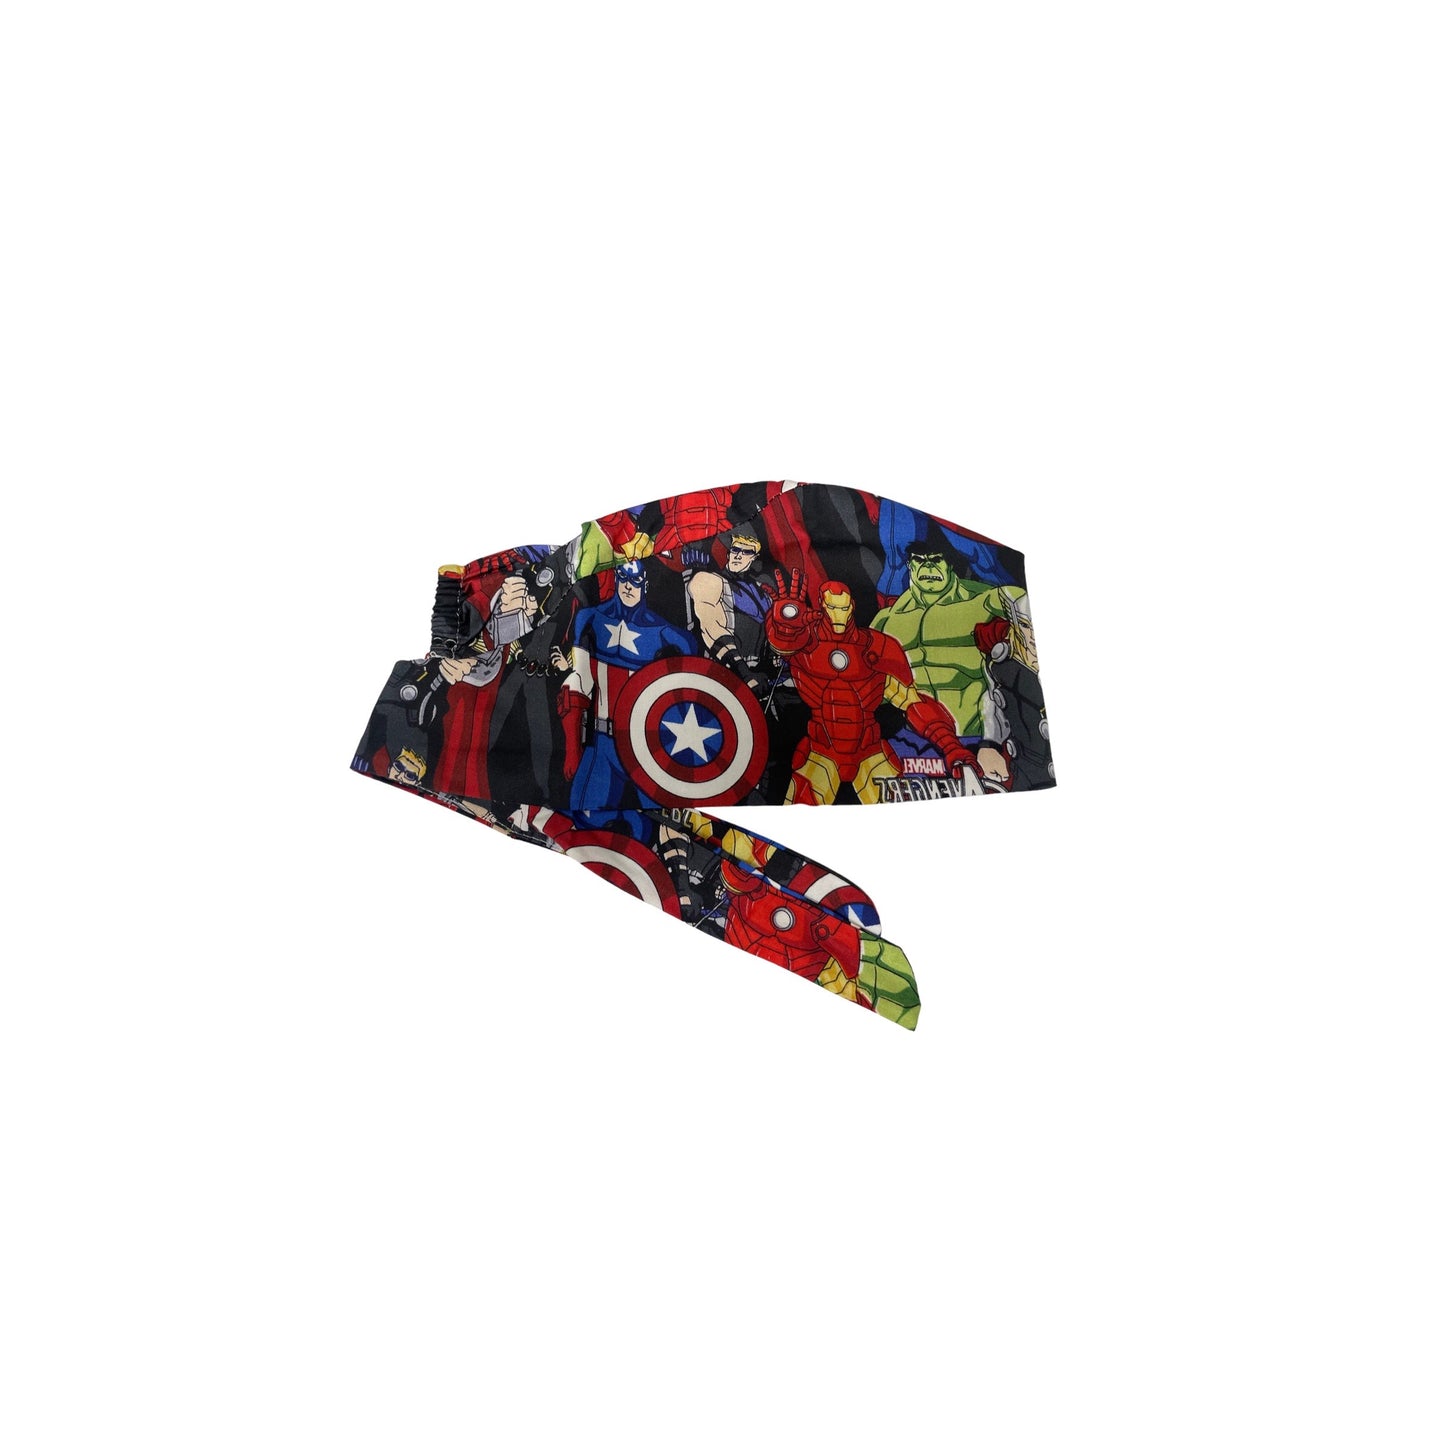 "Avengers" Hat Collection